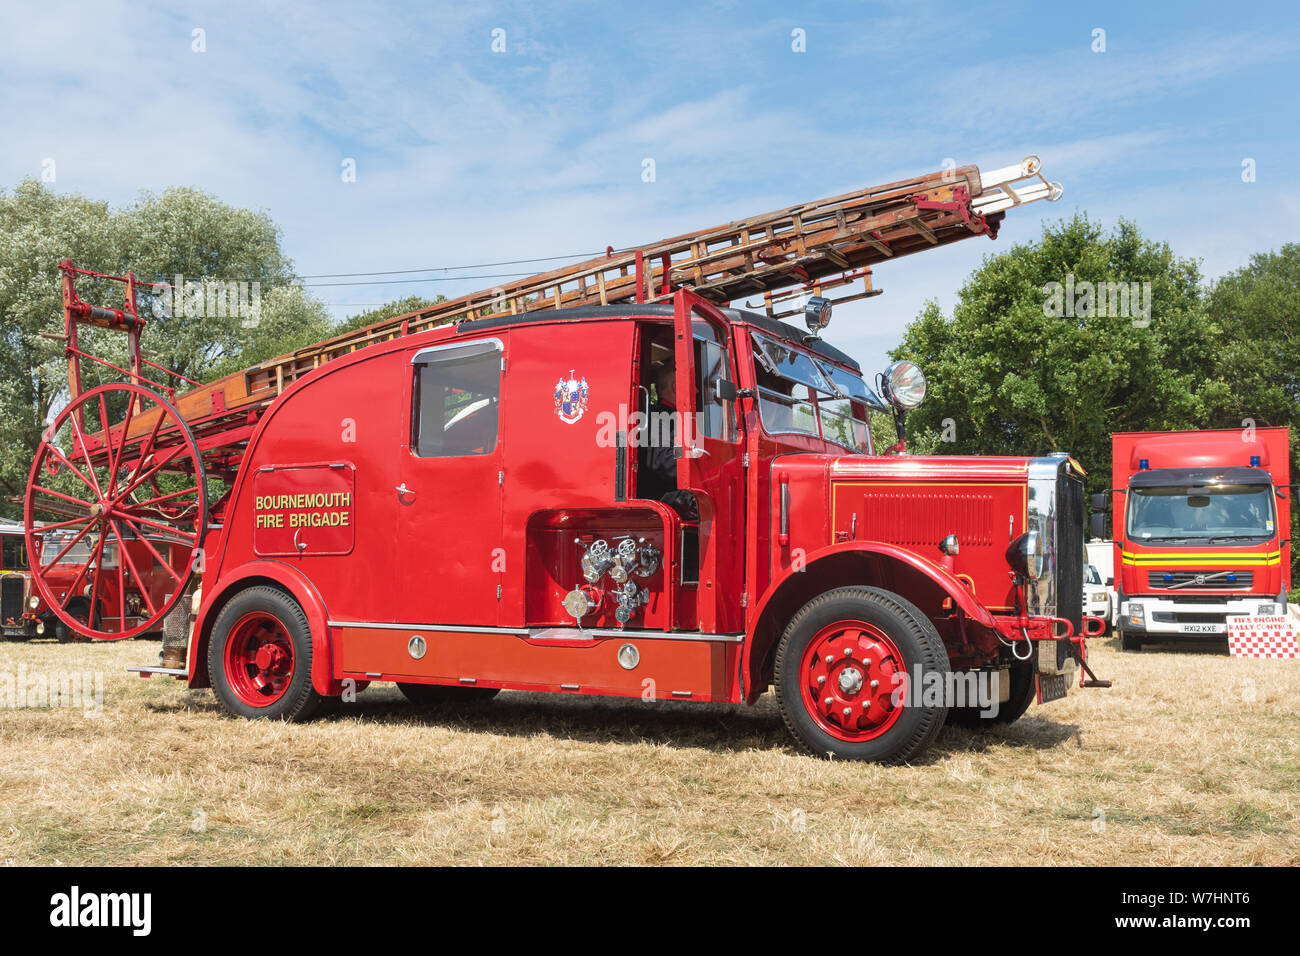 Fire engine on display at the Odiham Fire Show, 2019, in Hampshire, UK. A 1939 Leyland FK9 pump escape from Bournemouth Fire Brigade. Stock Photo